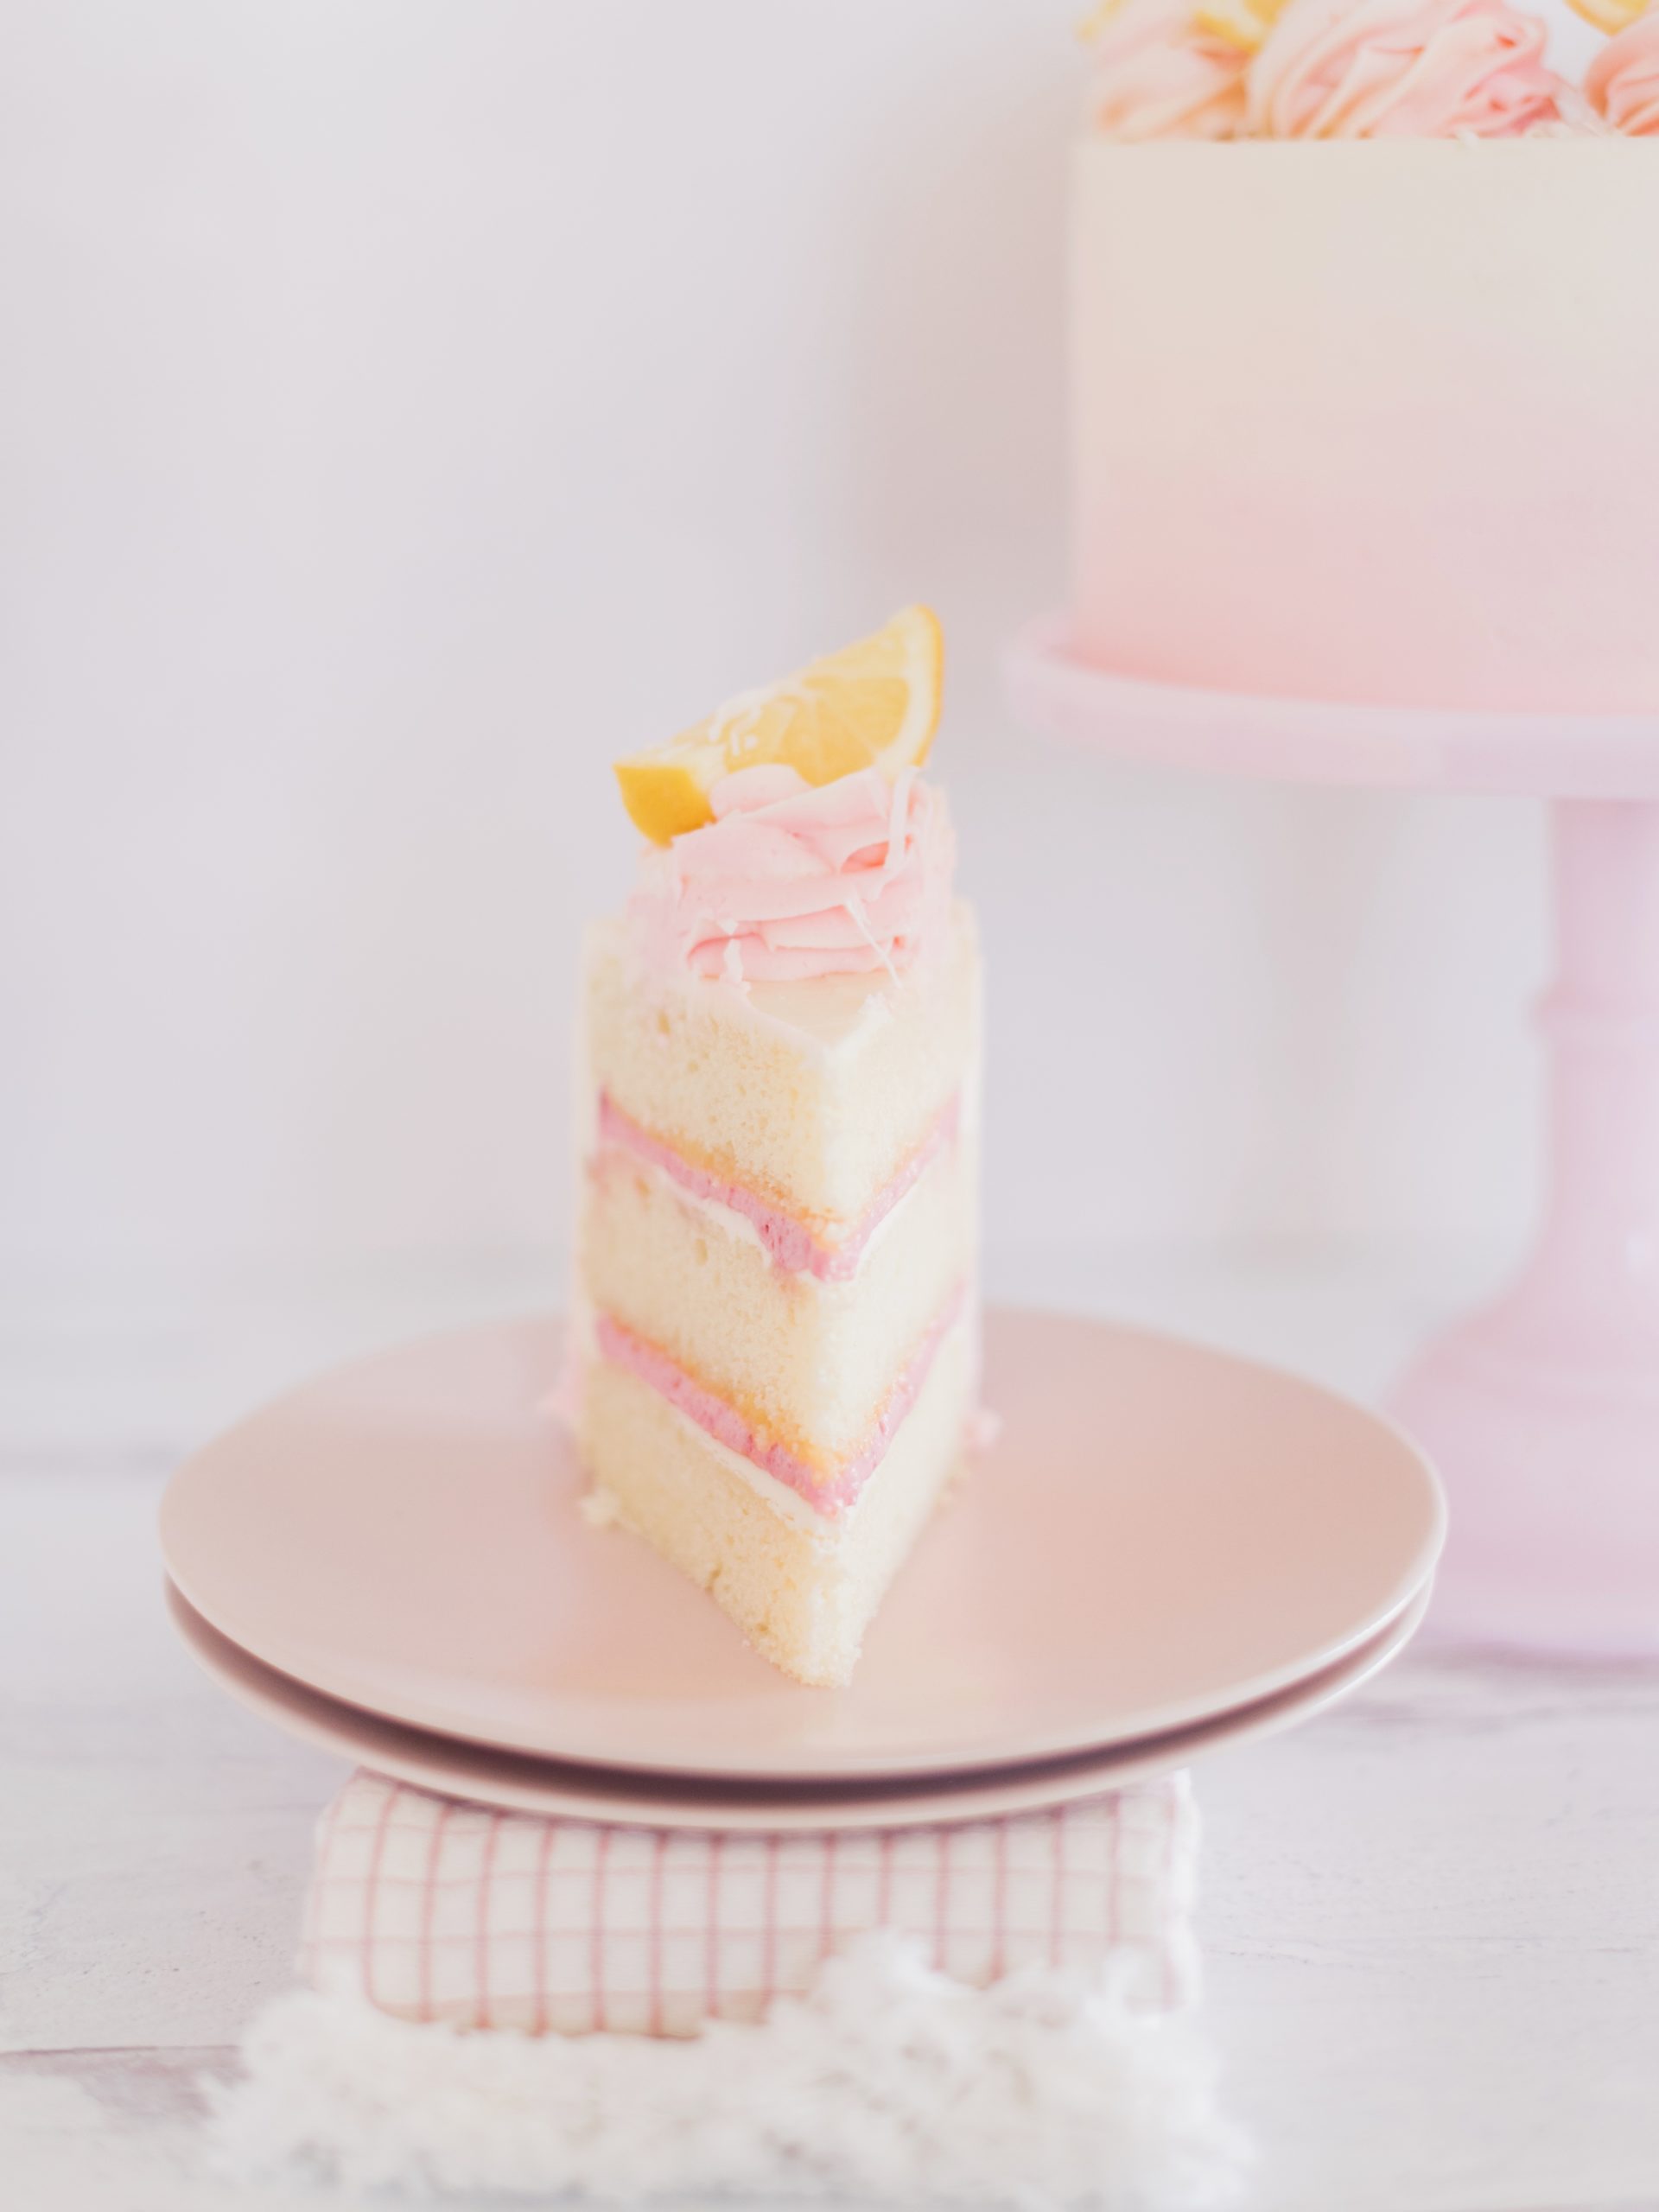 A slice of cake on a pink plate.